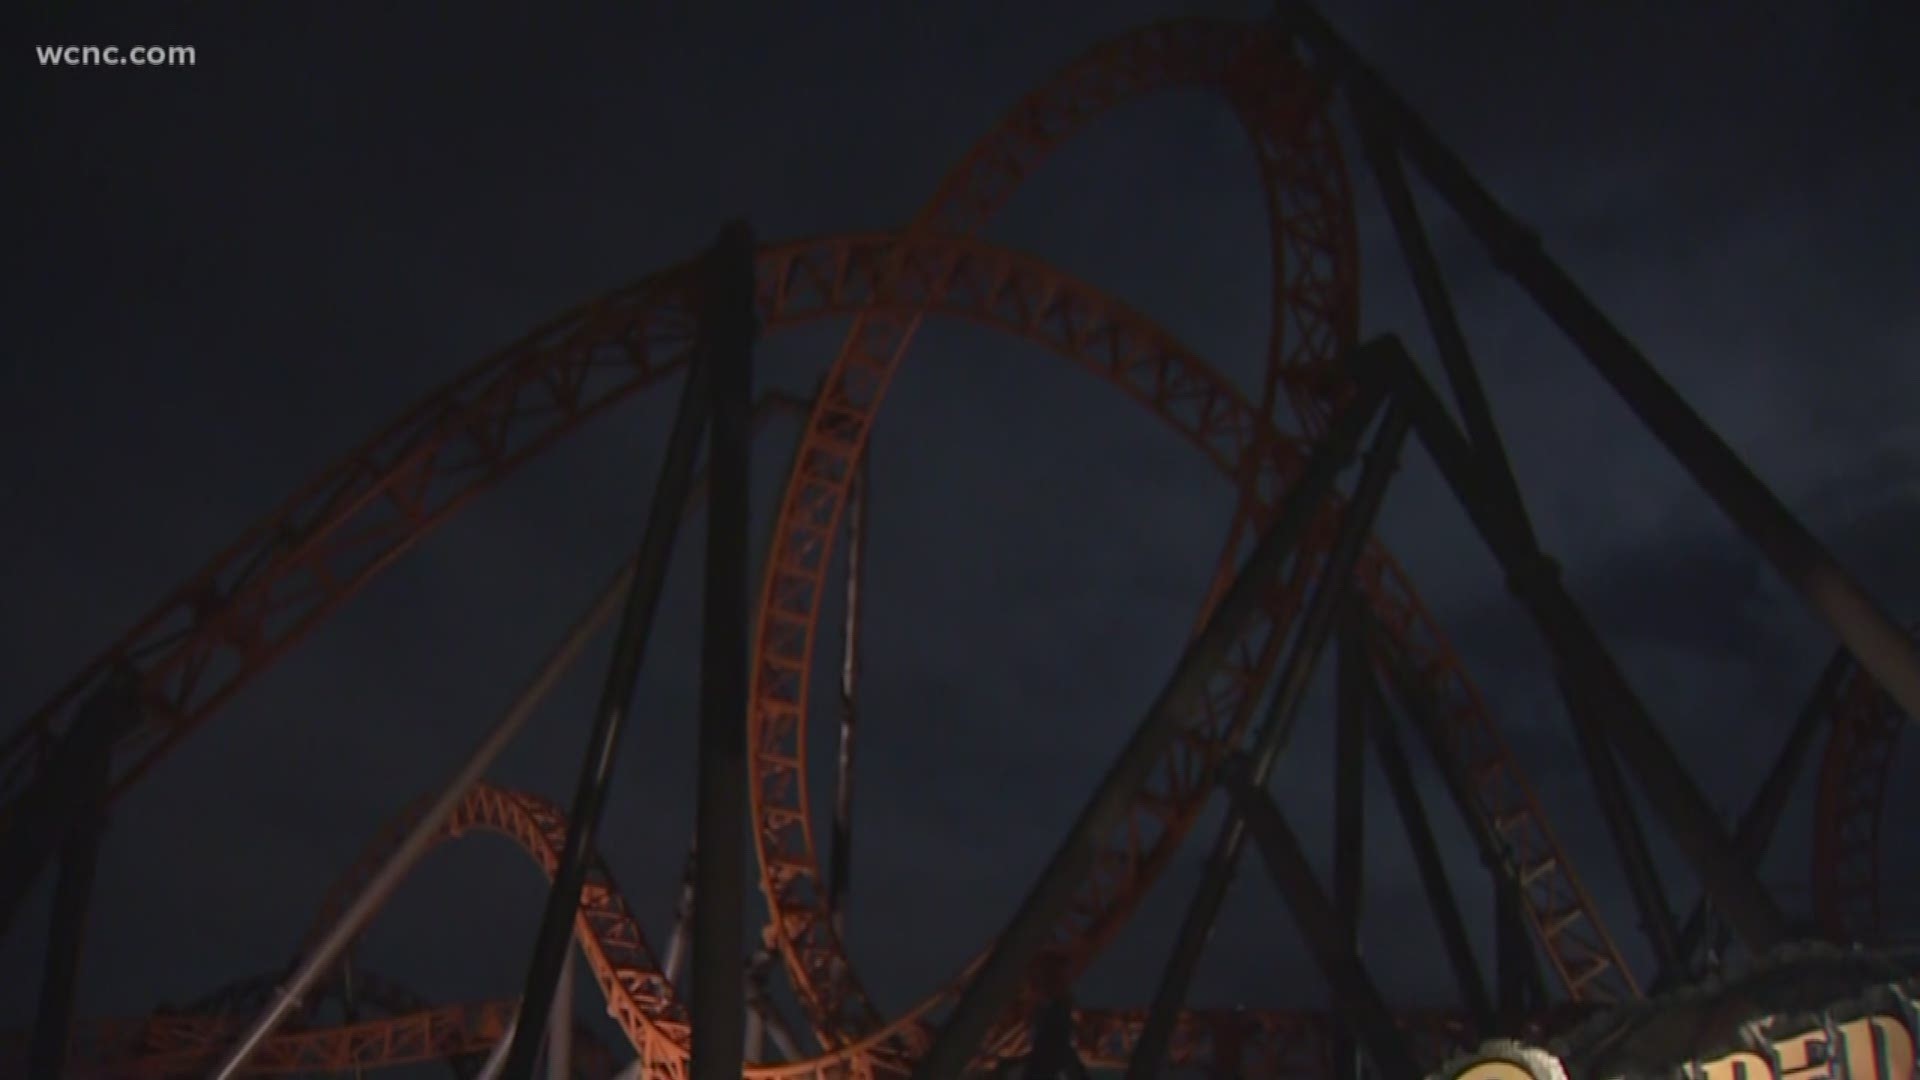 If you love roller coasters, than the newest ride at Carowinds needs to be on your bucket list. Copperhead Strike is the Carolinas' first-ever double-launch coaster and is set to open for the 2019 season.